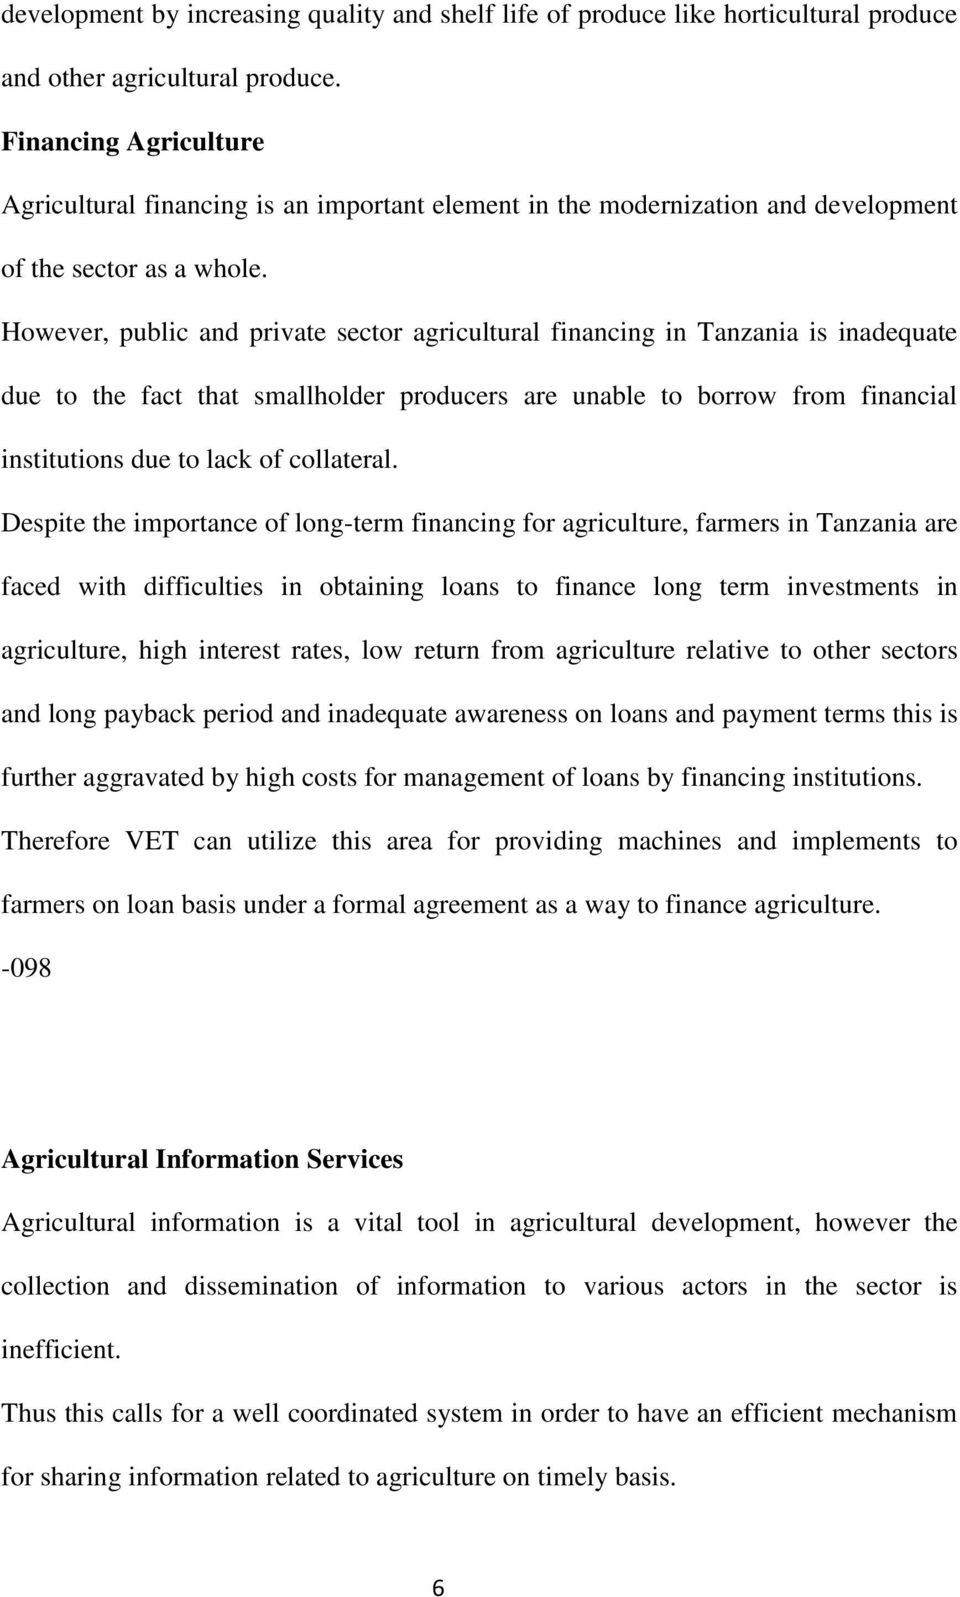 However, public and private sector agricultural financing in Tanzania is inadequate due to the fact that smallholder producers are unable to borrow from financial institutions due to lack of